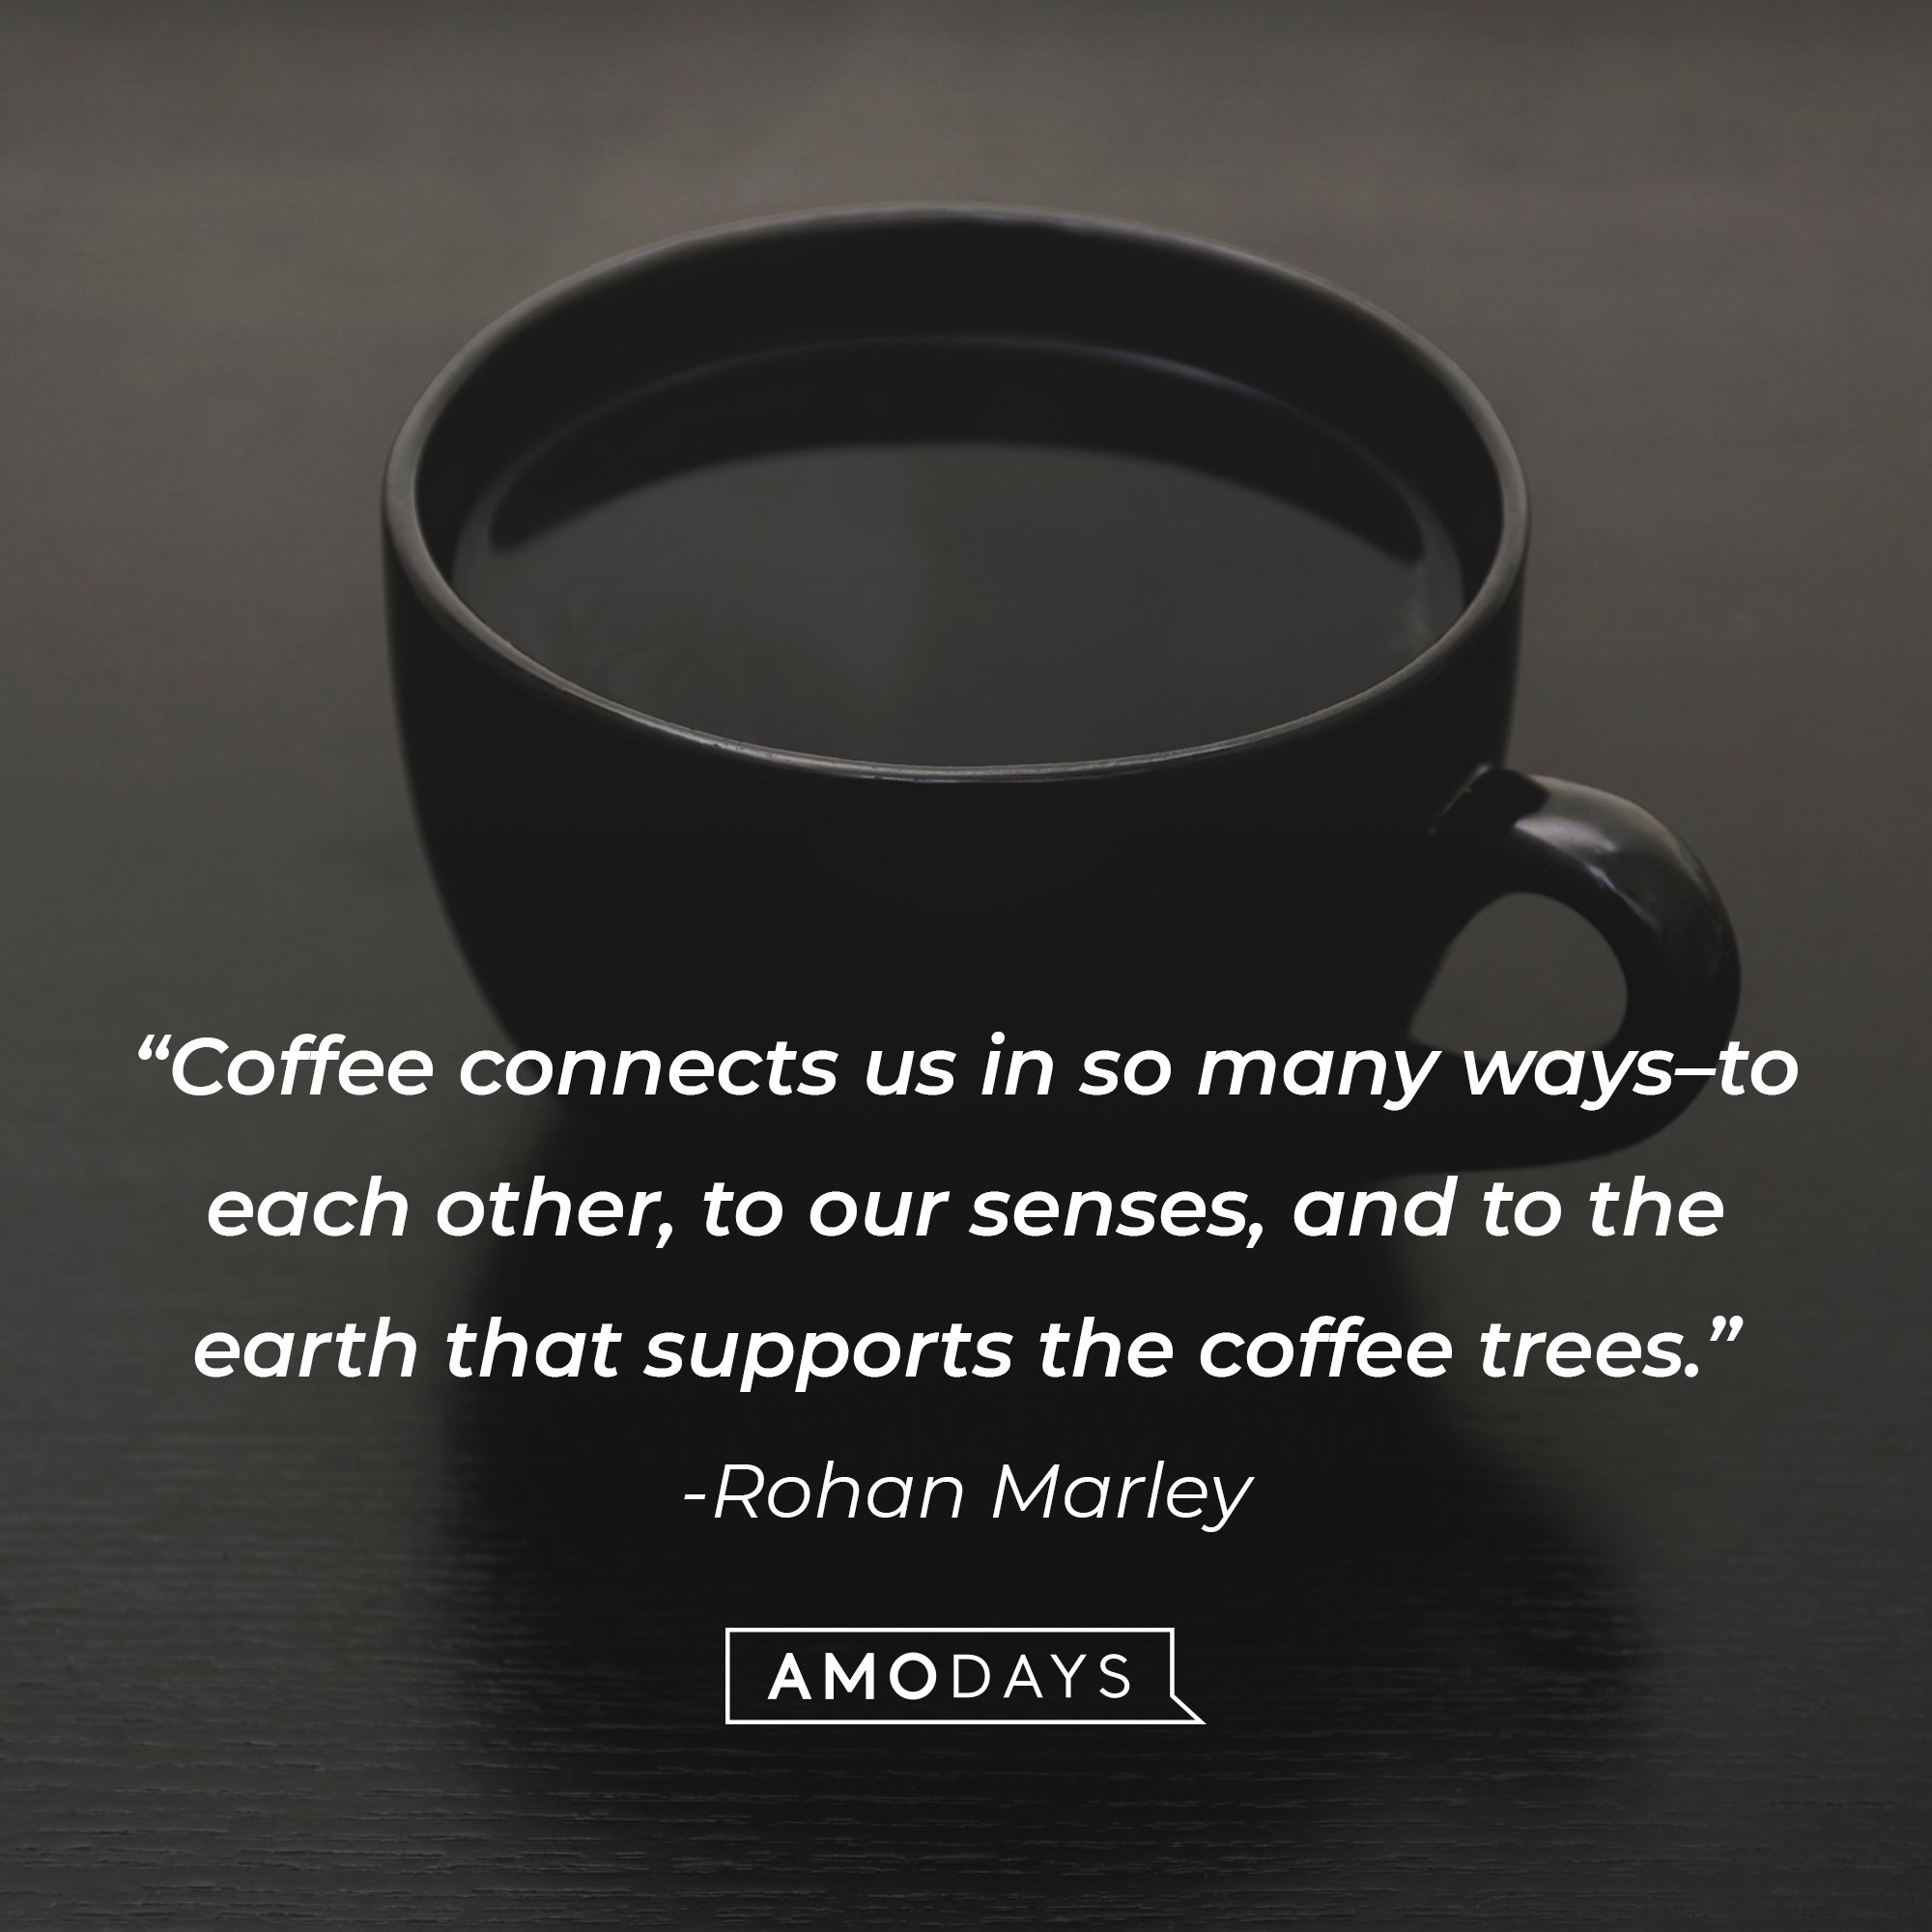 Rohan Marley's quote: "Coffee connects us in so many ways–to each other, to our senses, and to the earth that supports the coffee trees." | Image: AmoDays